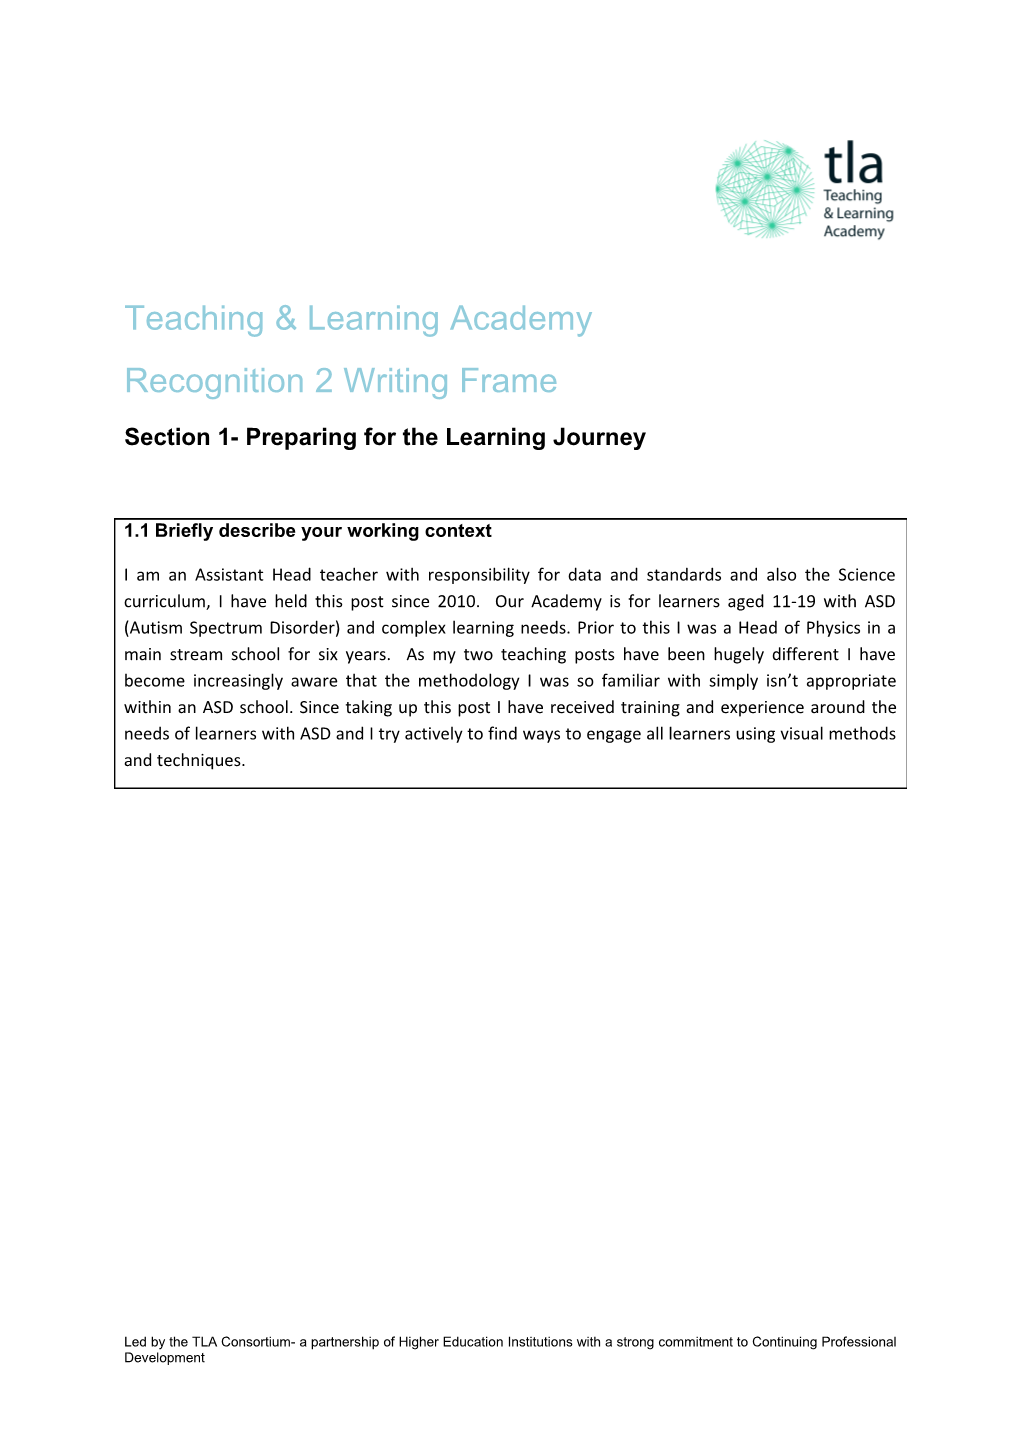 Section 1- Preparing for the Learning Journey